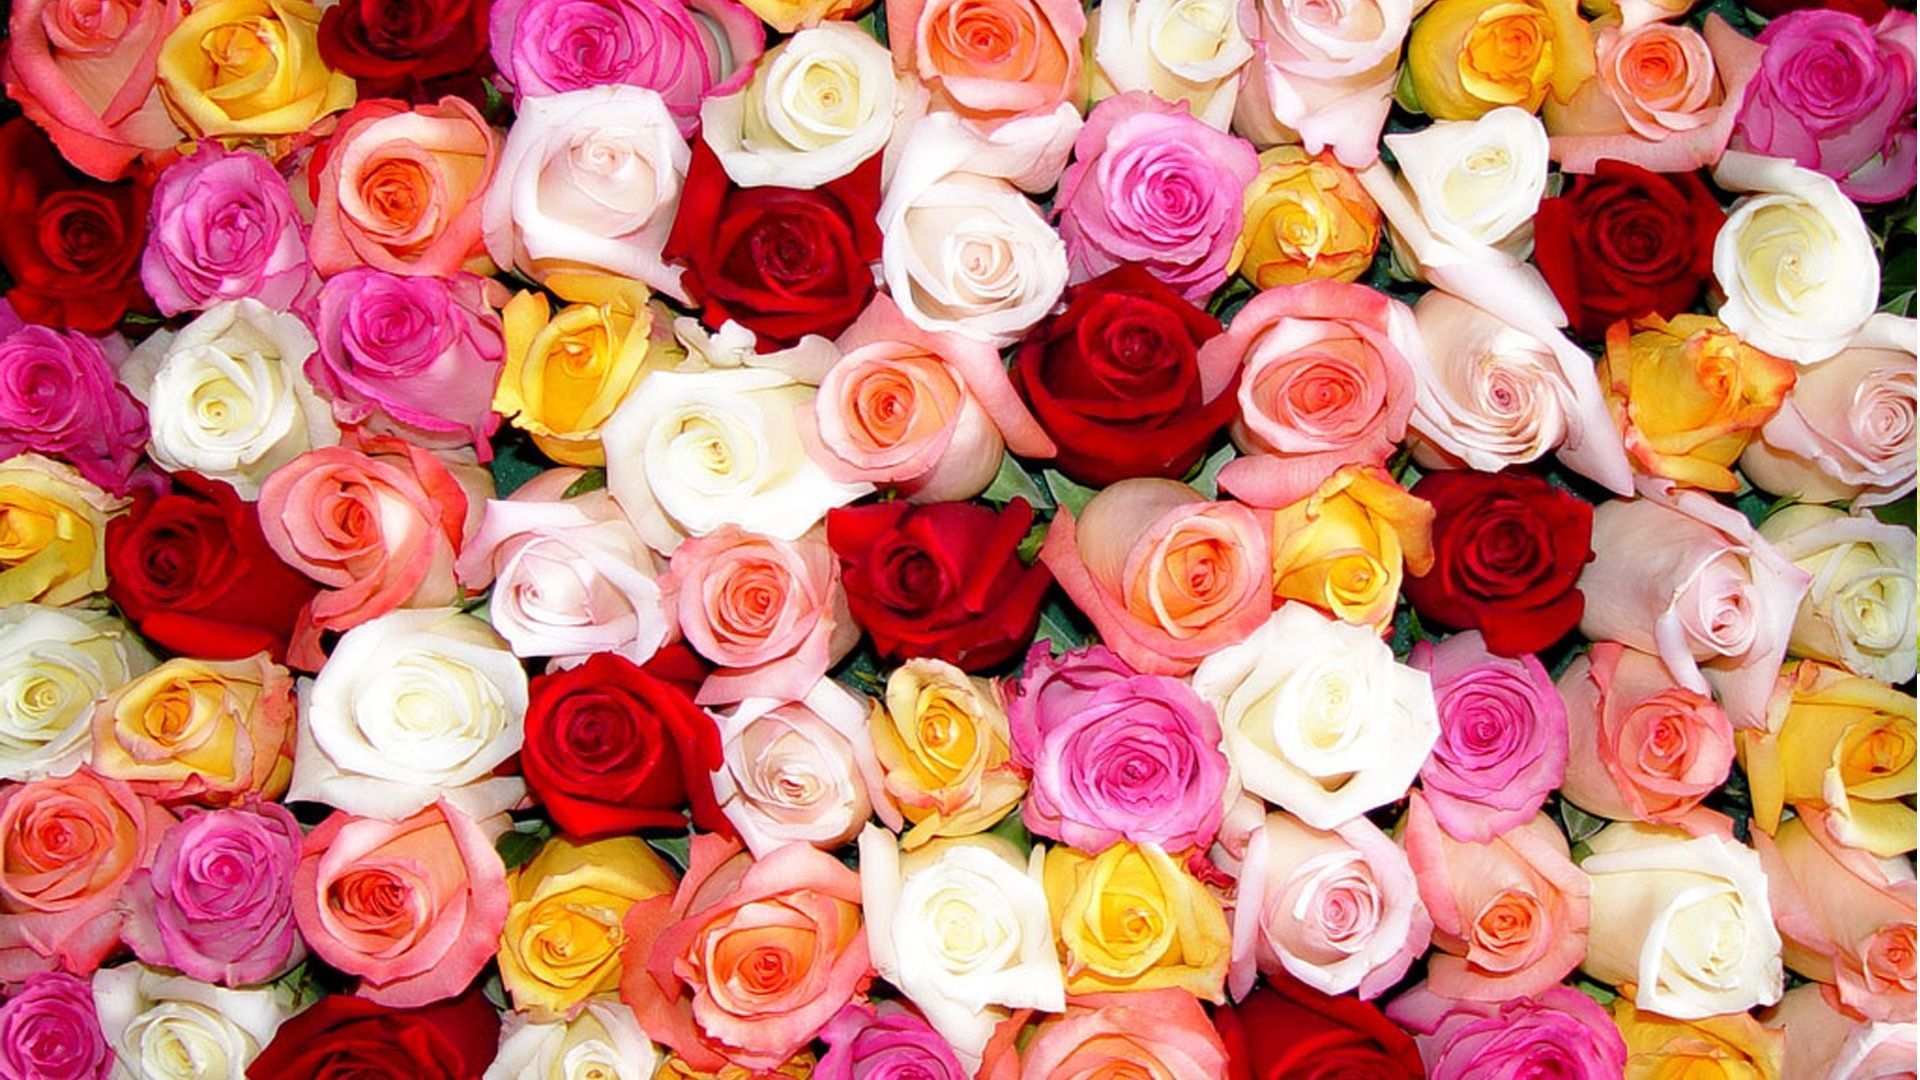 Pictures Of Roses Wallpapers - Wallpaper Cave